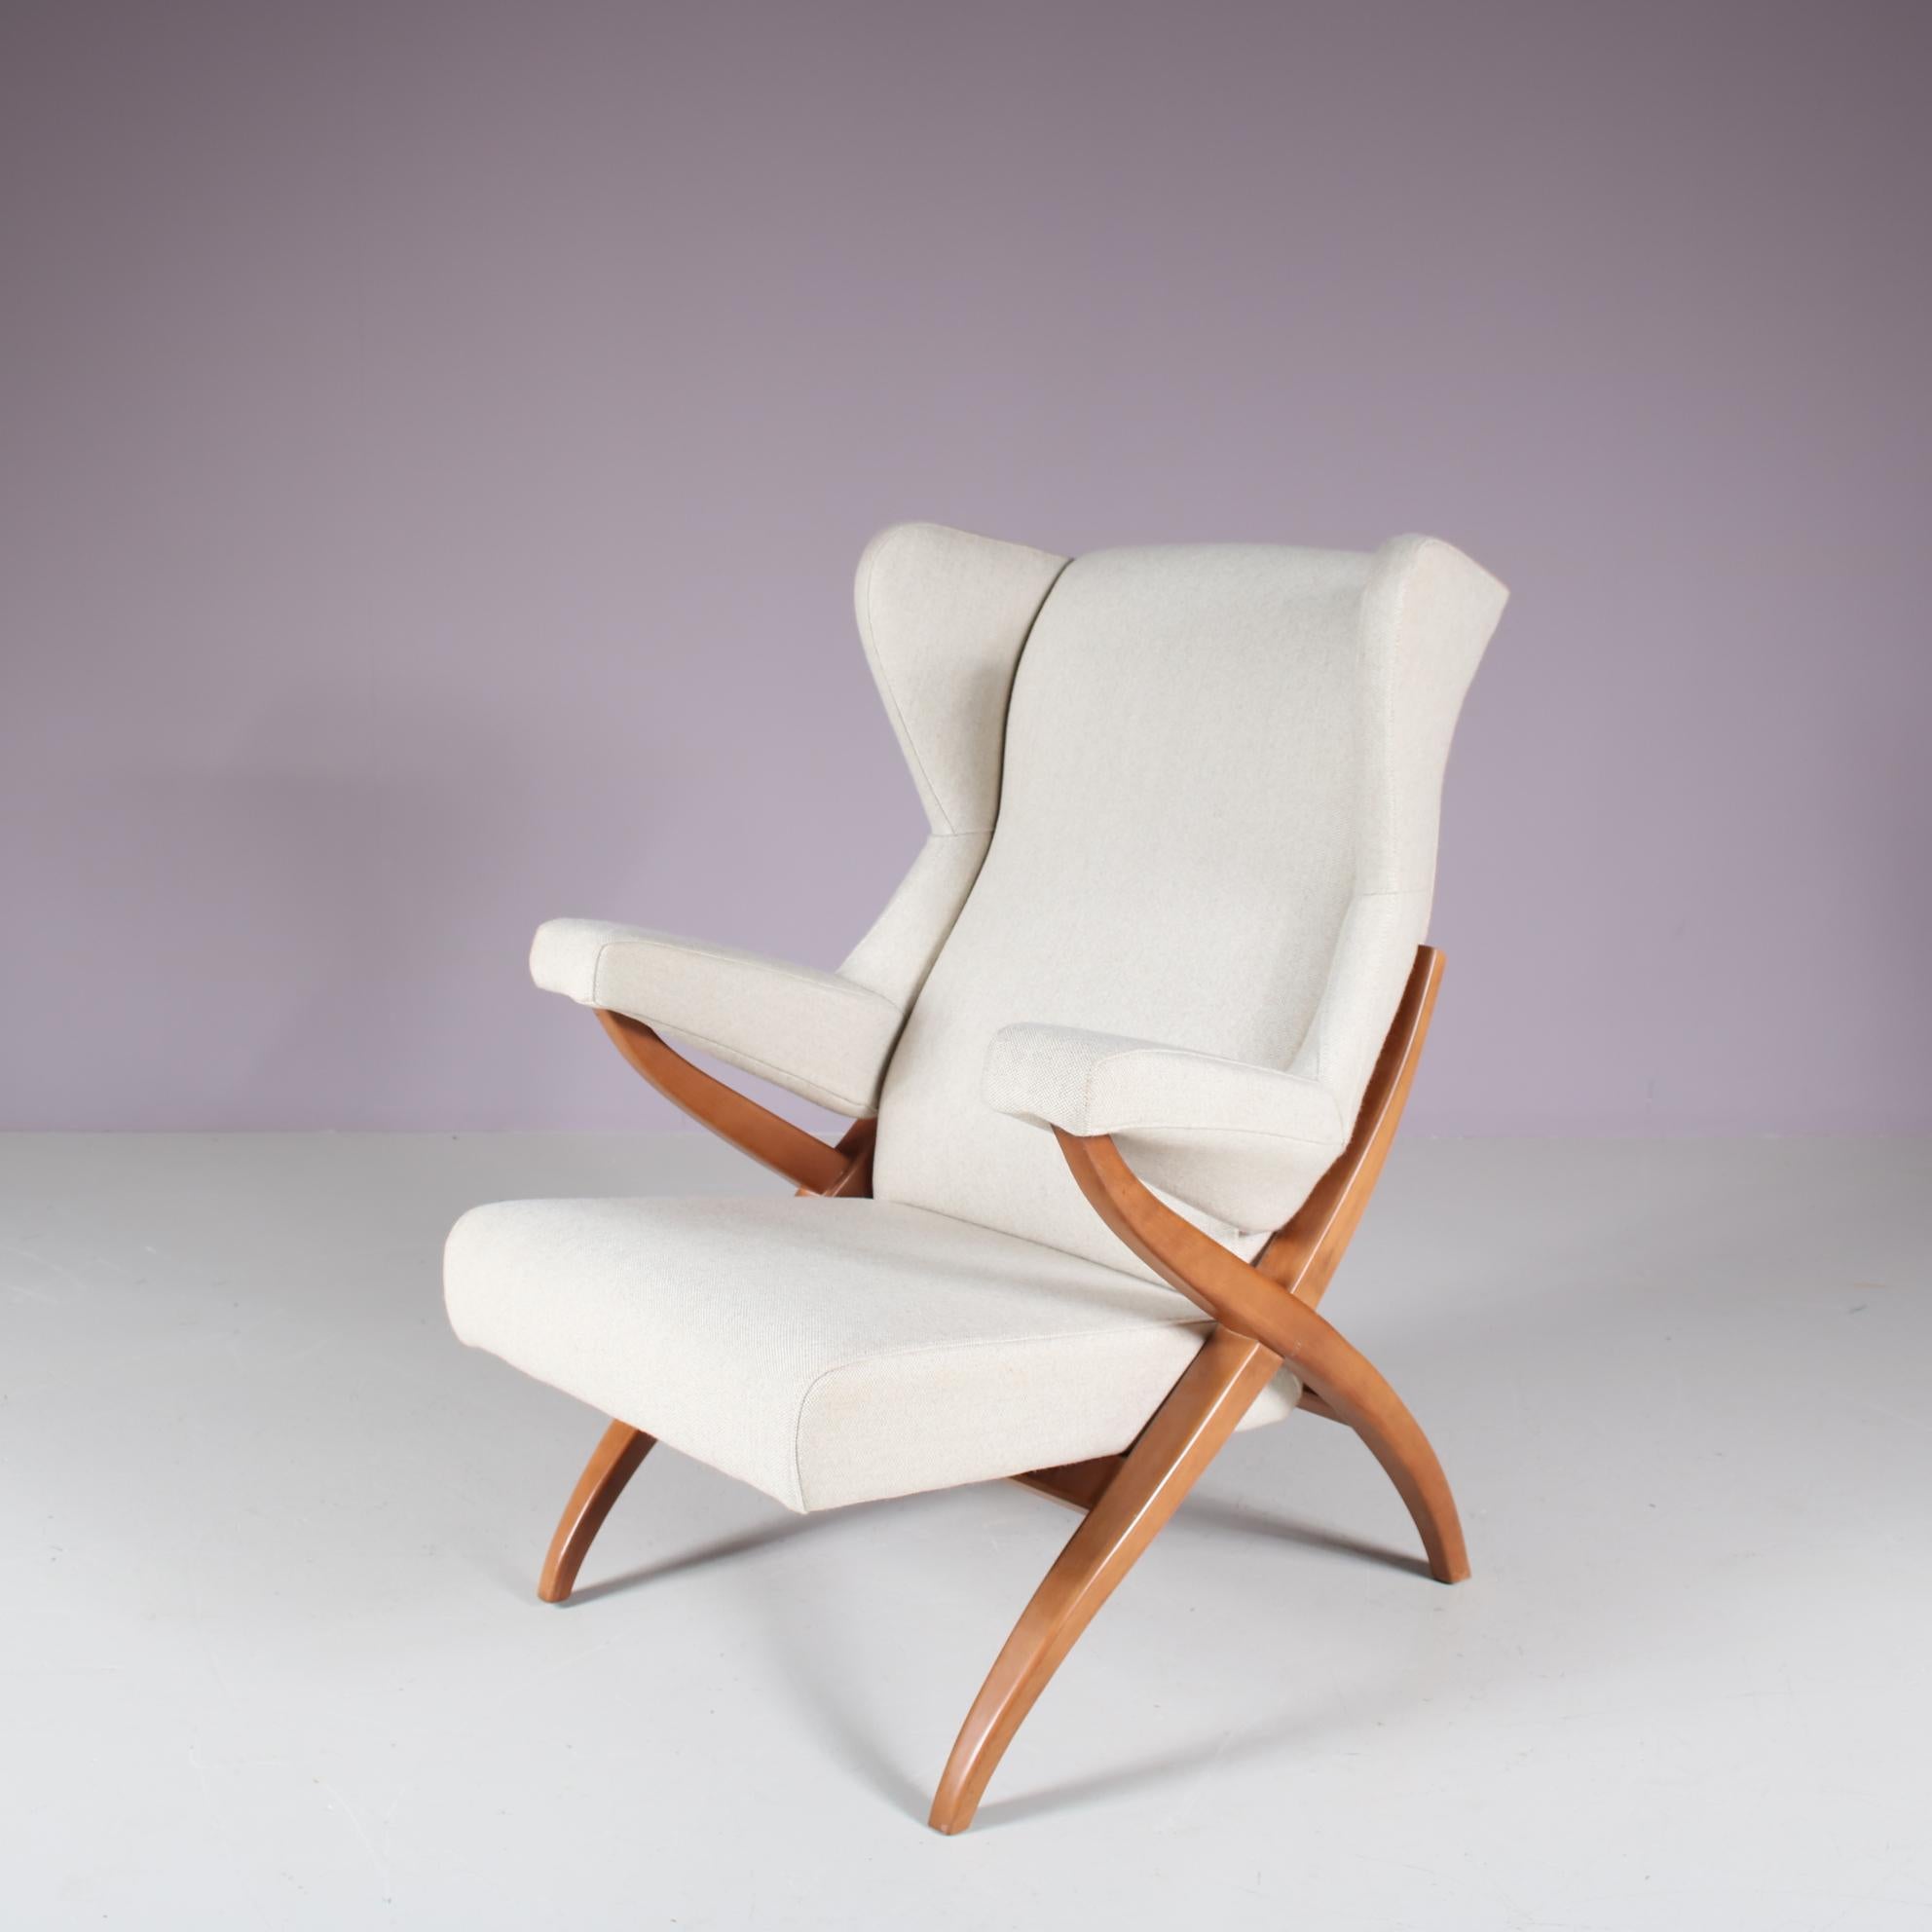 The “Fiorenza” chair is an iconic design by Franco Albini, manufactured by Arflex in Italy around 1970.

The elegant curves of the wooden frame contrast nicely to the light fabric of the seat, back and armrests. This all gives the piece a beautiful